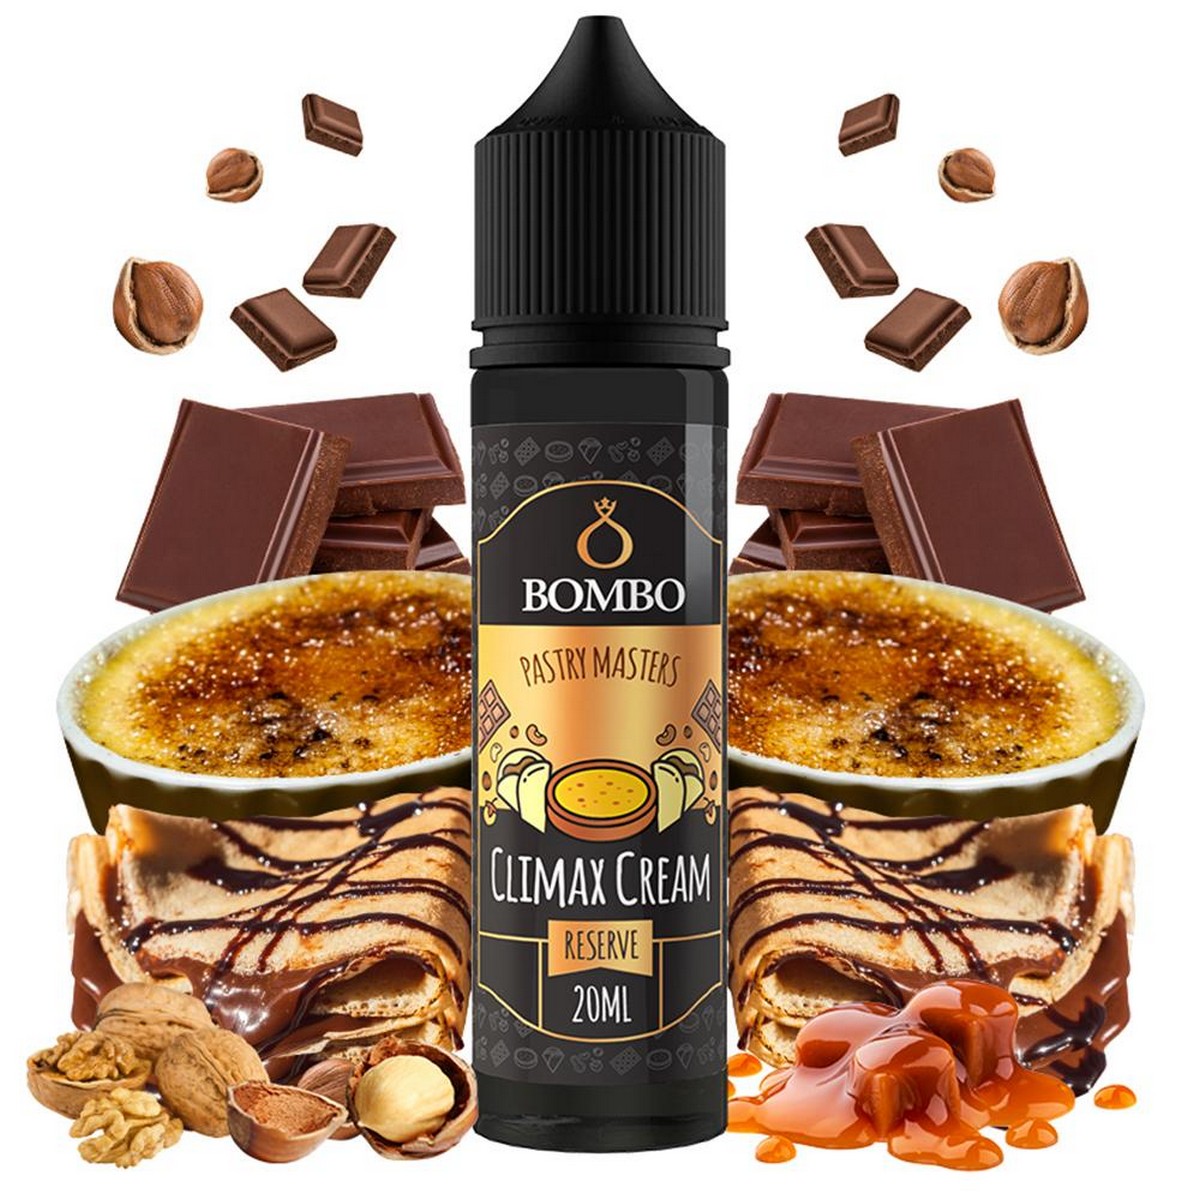 Bombo Pastry Masters Flavor Shot Climax Cream 20ml/60ml